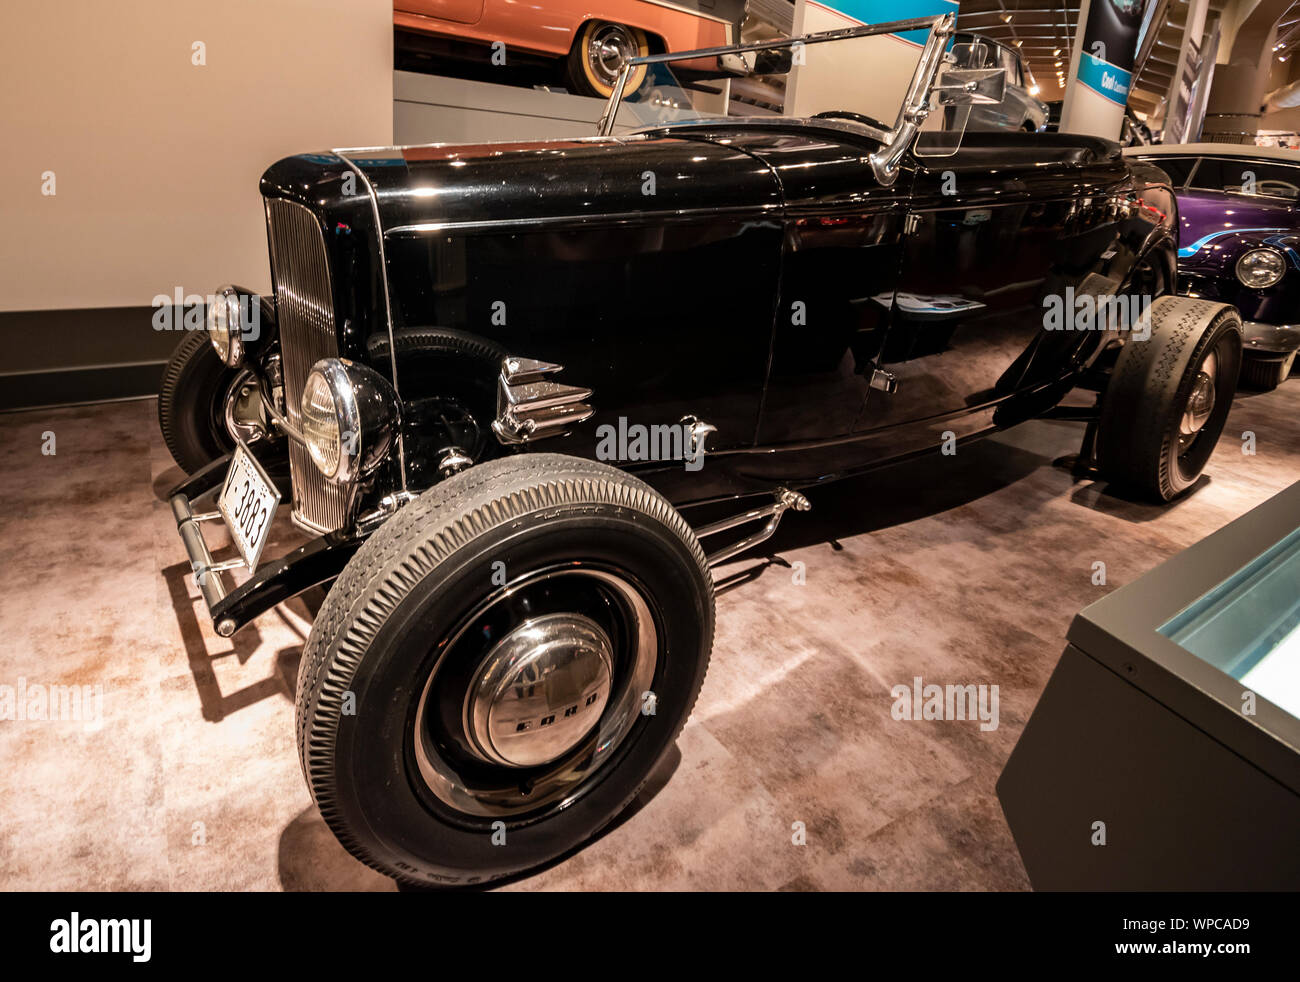 Dearborn, Mi, Usa - March 2019: The 1932 Ford Roadster presented in the Henry Ford Museum of American Innovation. Stock Photo